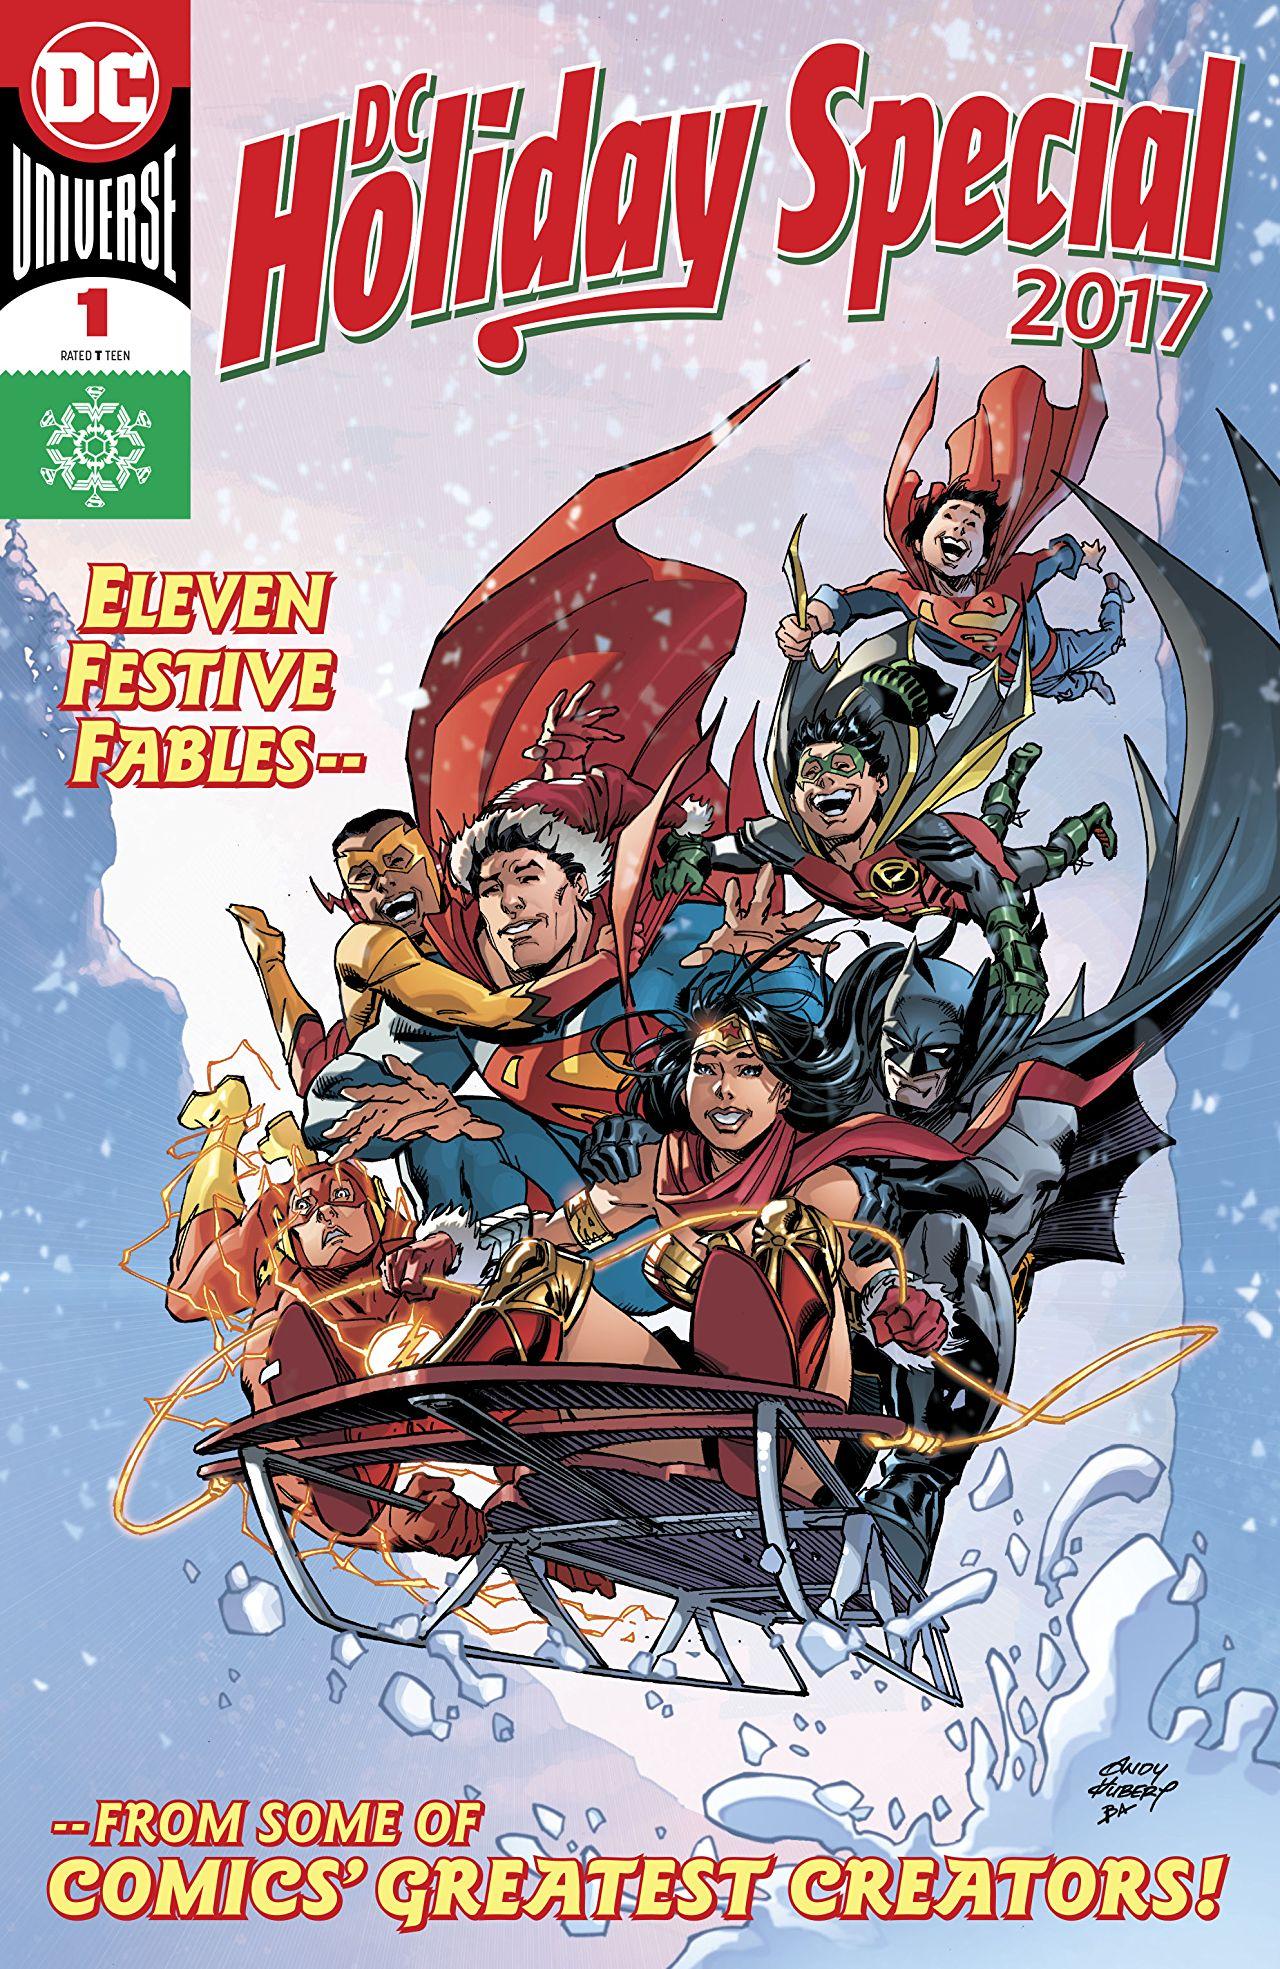 DC Holiday Special 2017 Vol. 1 #1